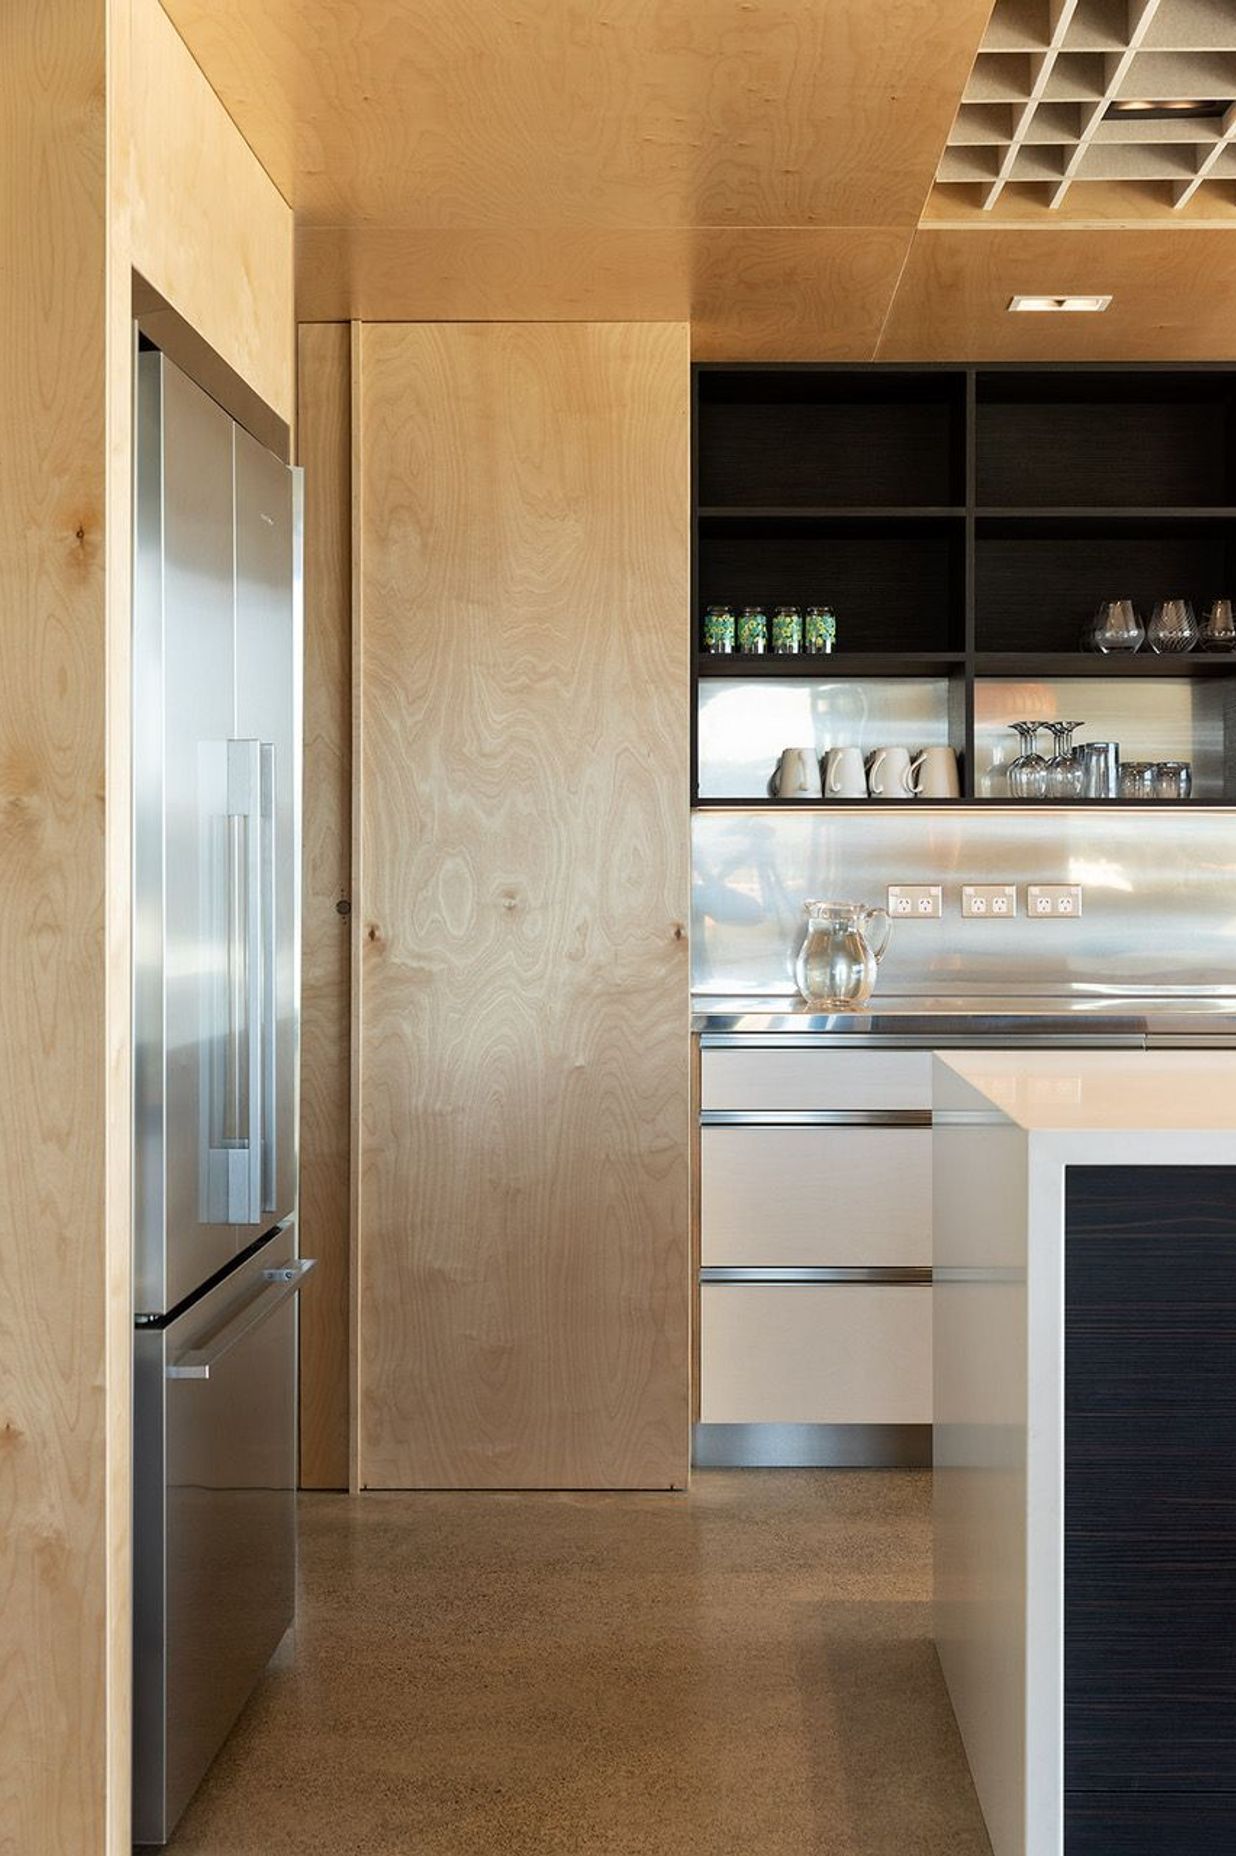 The kitchen leads into a scullery out of view on the left. Photograph: Simon Devitt.